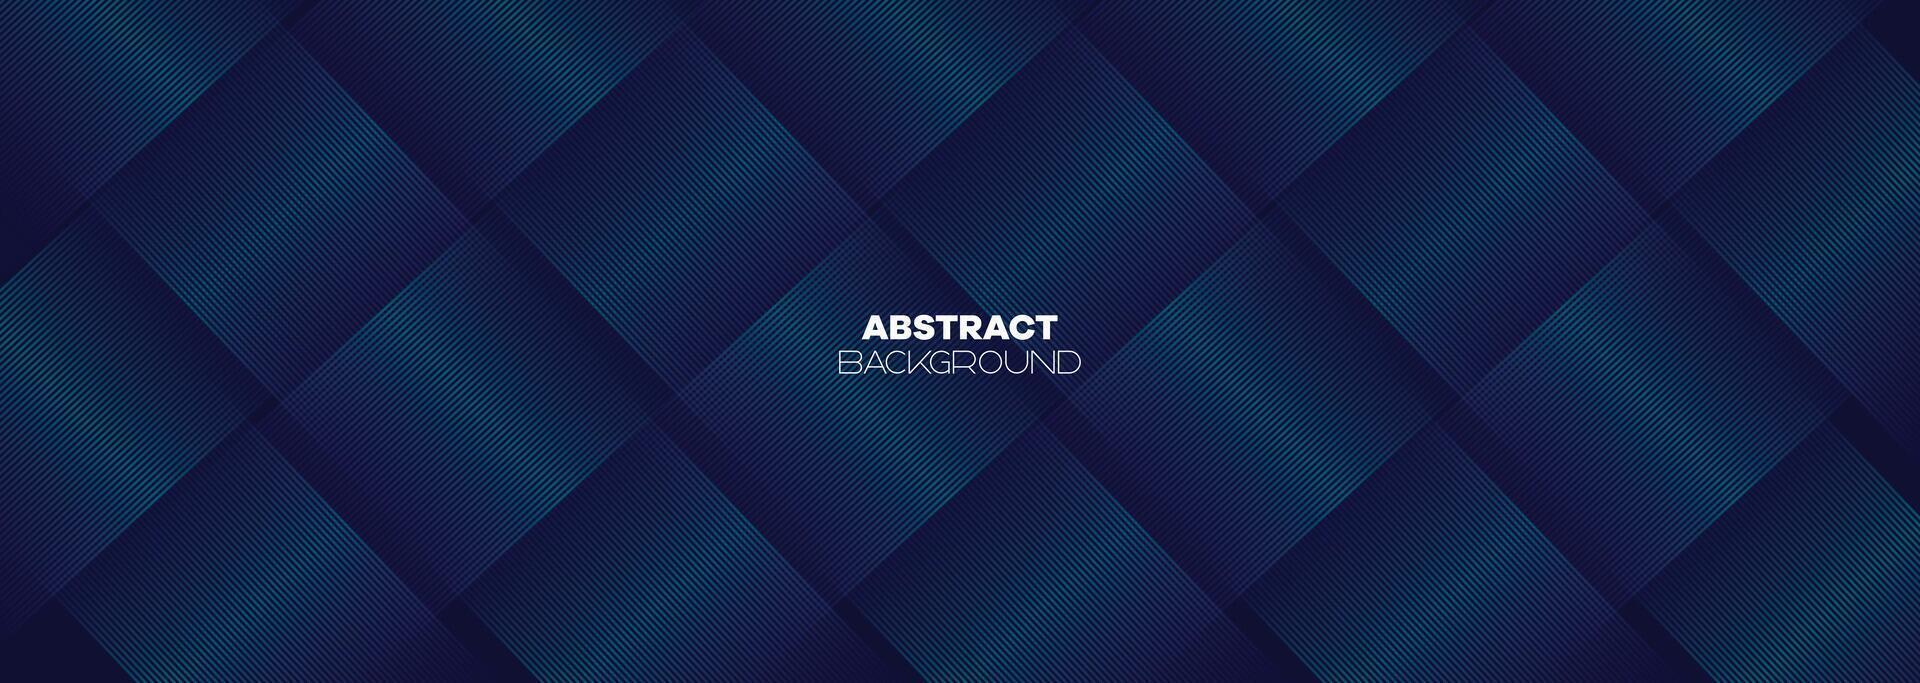 Abstract Dark Blue Green Waving Lines Technology Background. Modern Navy Blue Gradient With Glowing Lines Shiny Geometric Shape and Diagonal, for Brochure, Cover, Poster, Banner, Website, Header vector